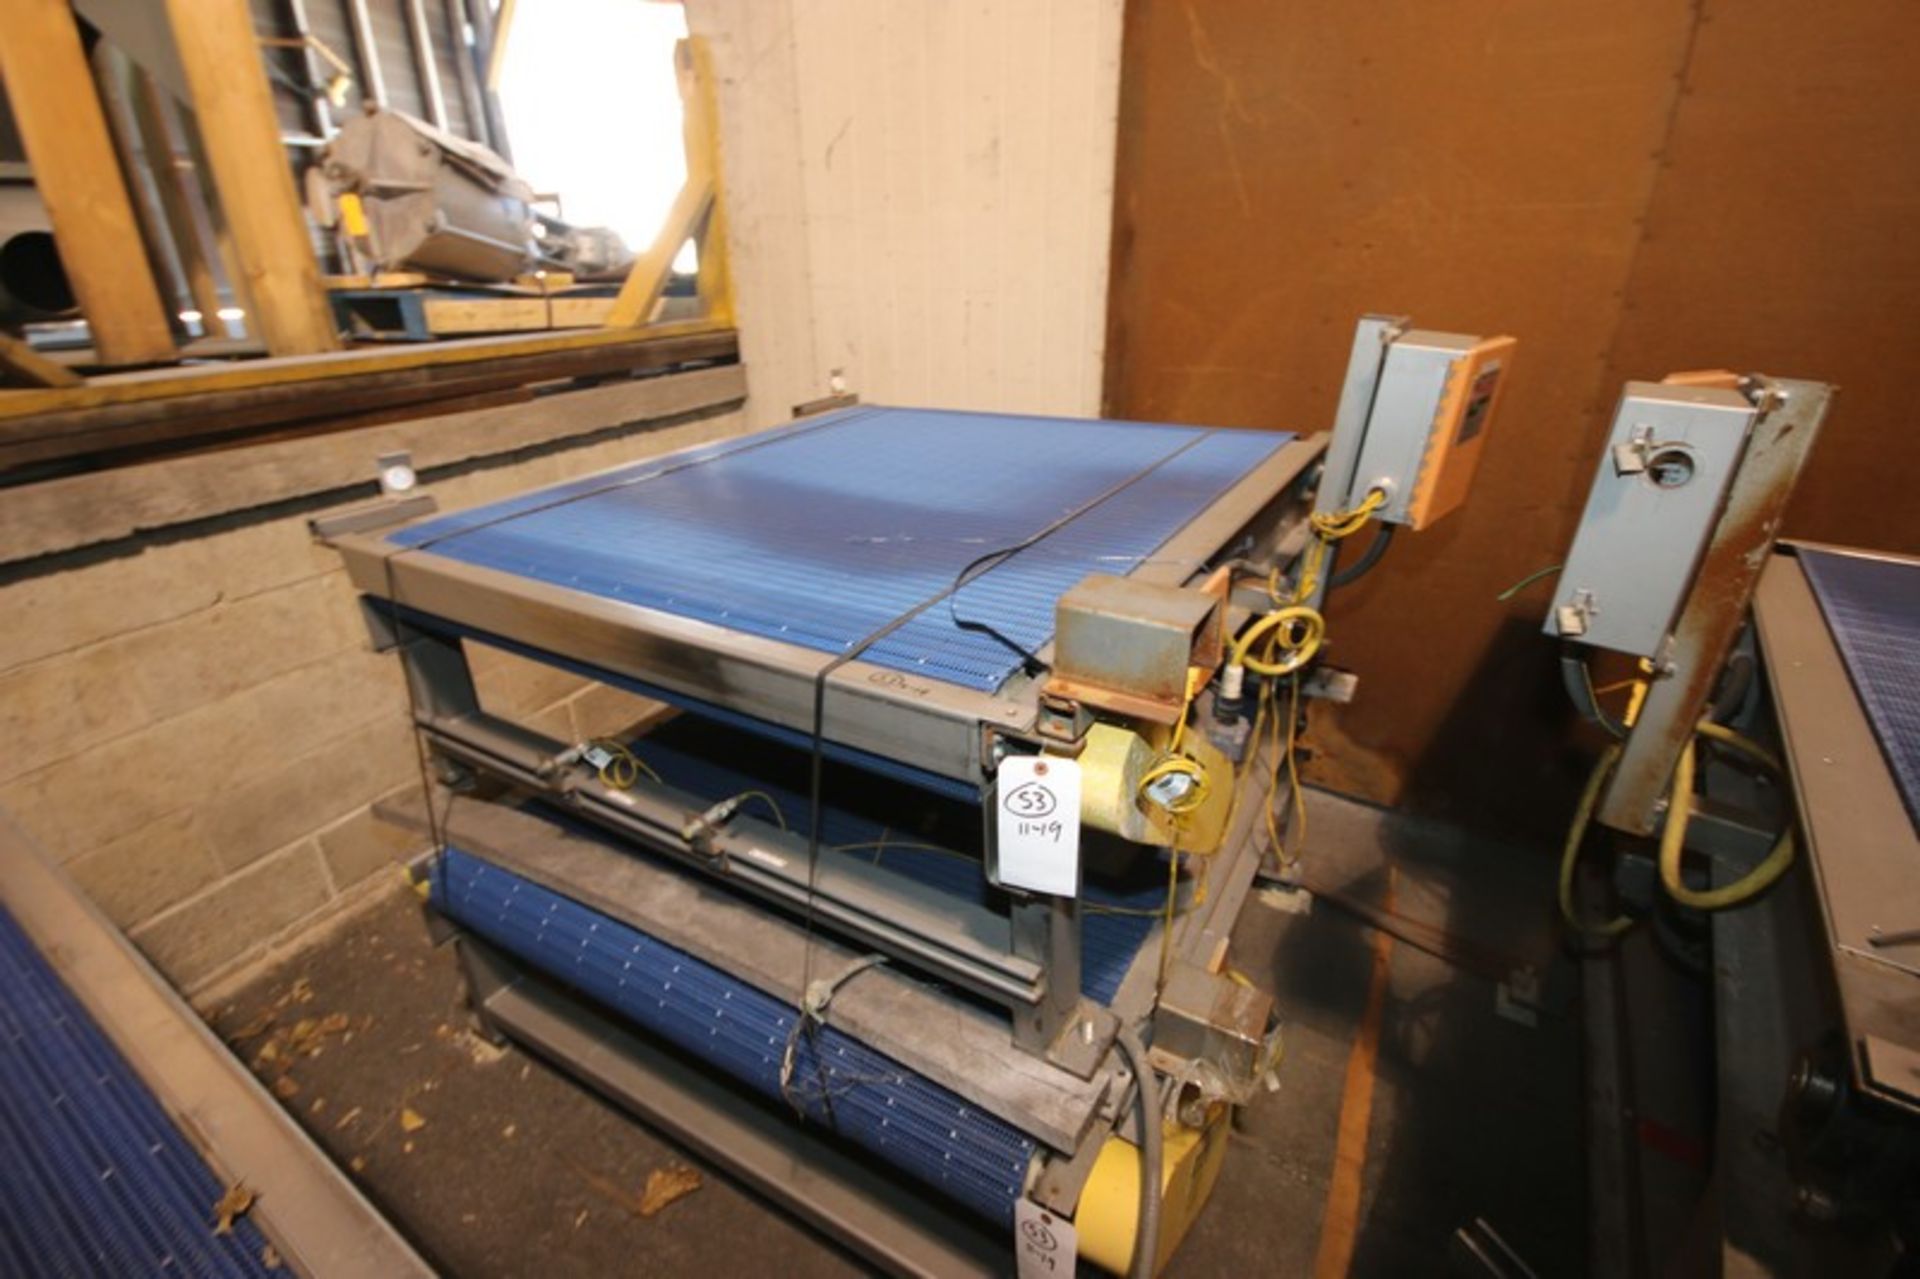 6-Sections of H&CS Conveyors, Overall Dims.: Aprox. 60" L x 64" W x 36" H, with Plastic Blue Belt, - Image 2 of 7